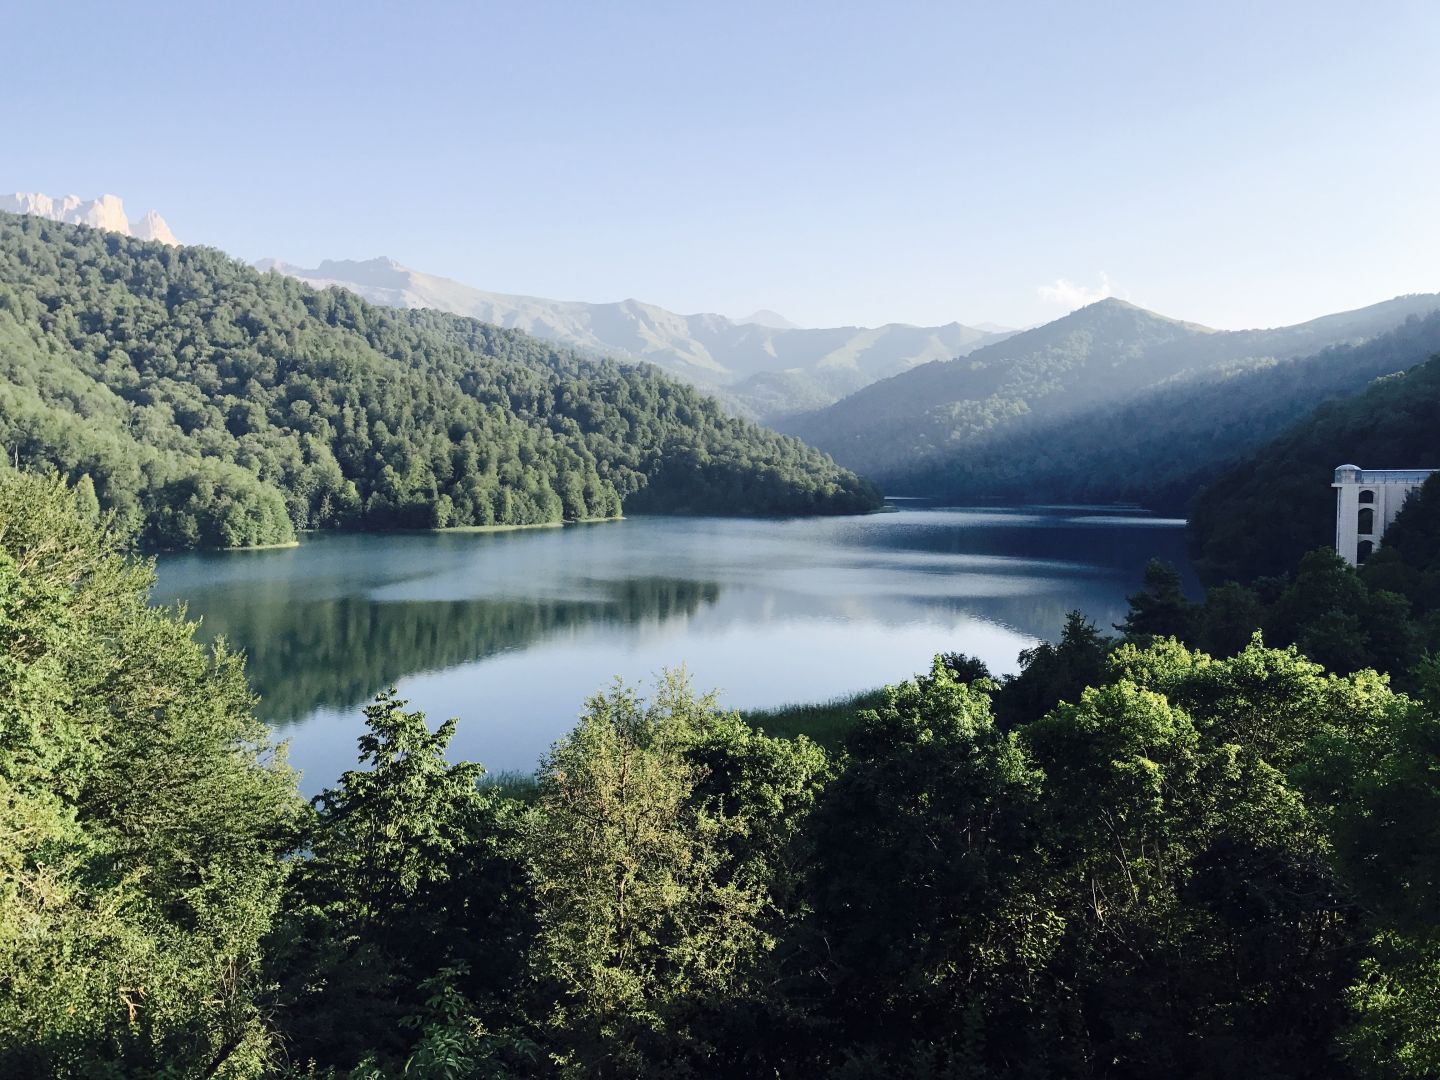 Goygol, Absheron & Shahdag among TOP 3 most visited national parks [PHOTOS]